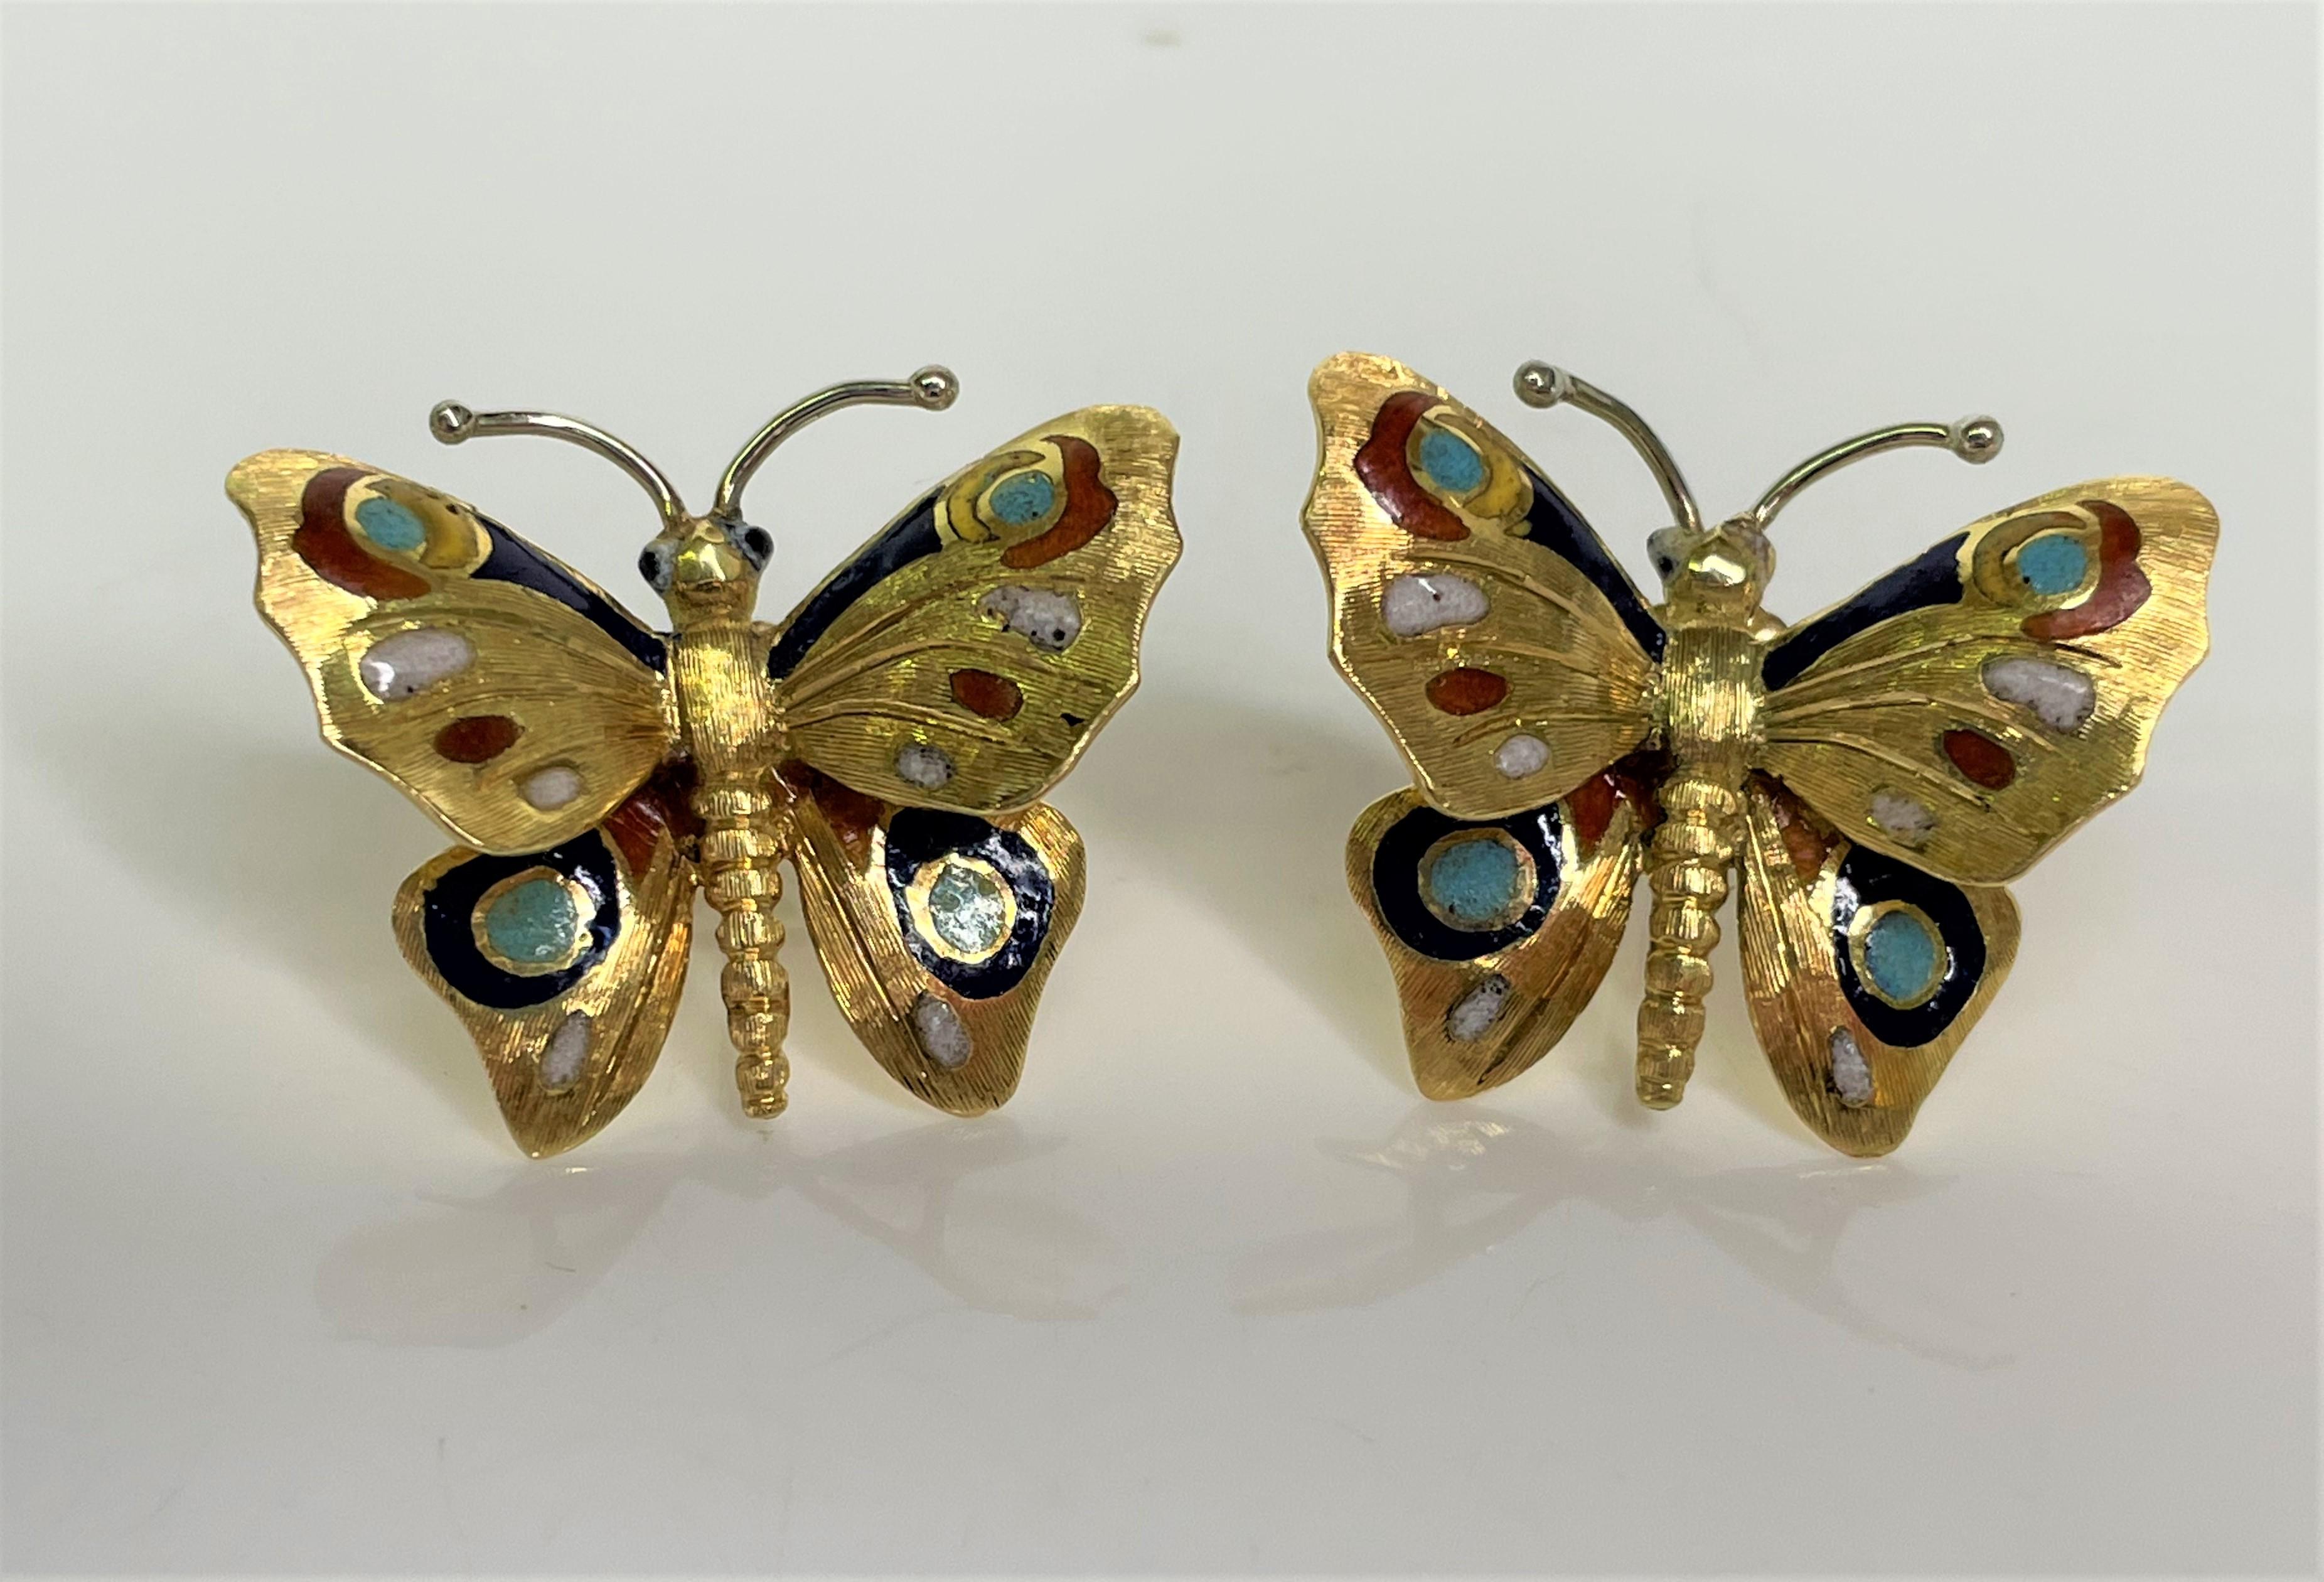 Perfect for any outfit!  These yellow gold butterflies are beautiful and are the perfect size!
Easy to wear, light weight (2.5dwt each)!
14 karat yellow and white gold butterfly earrings with post back.
Black, white, navy, red, yellow, aqua enamel